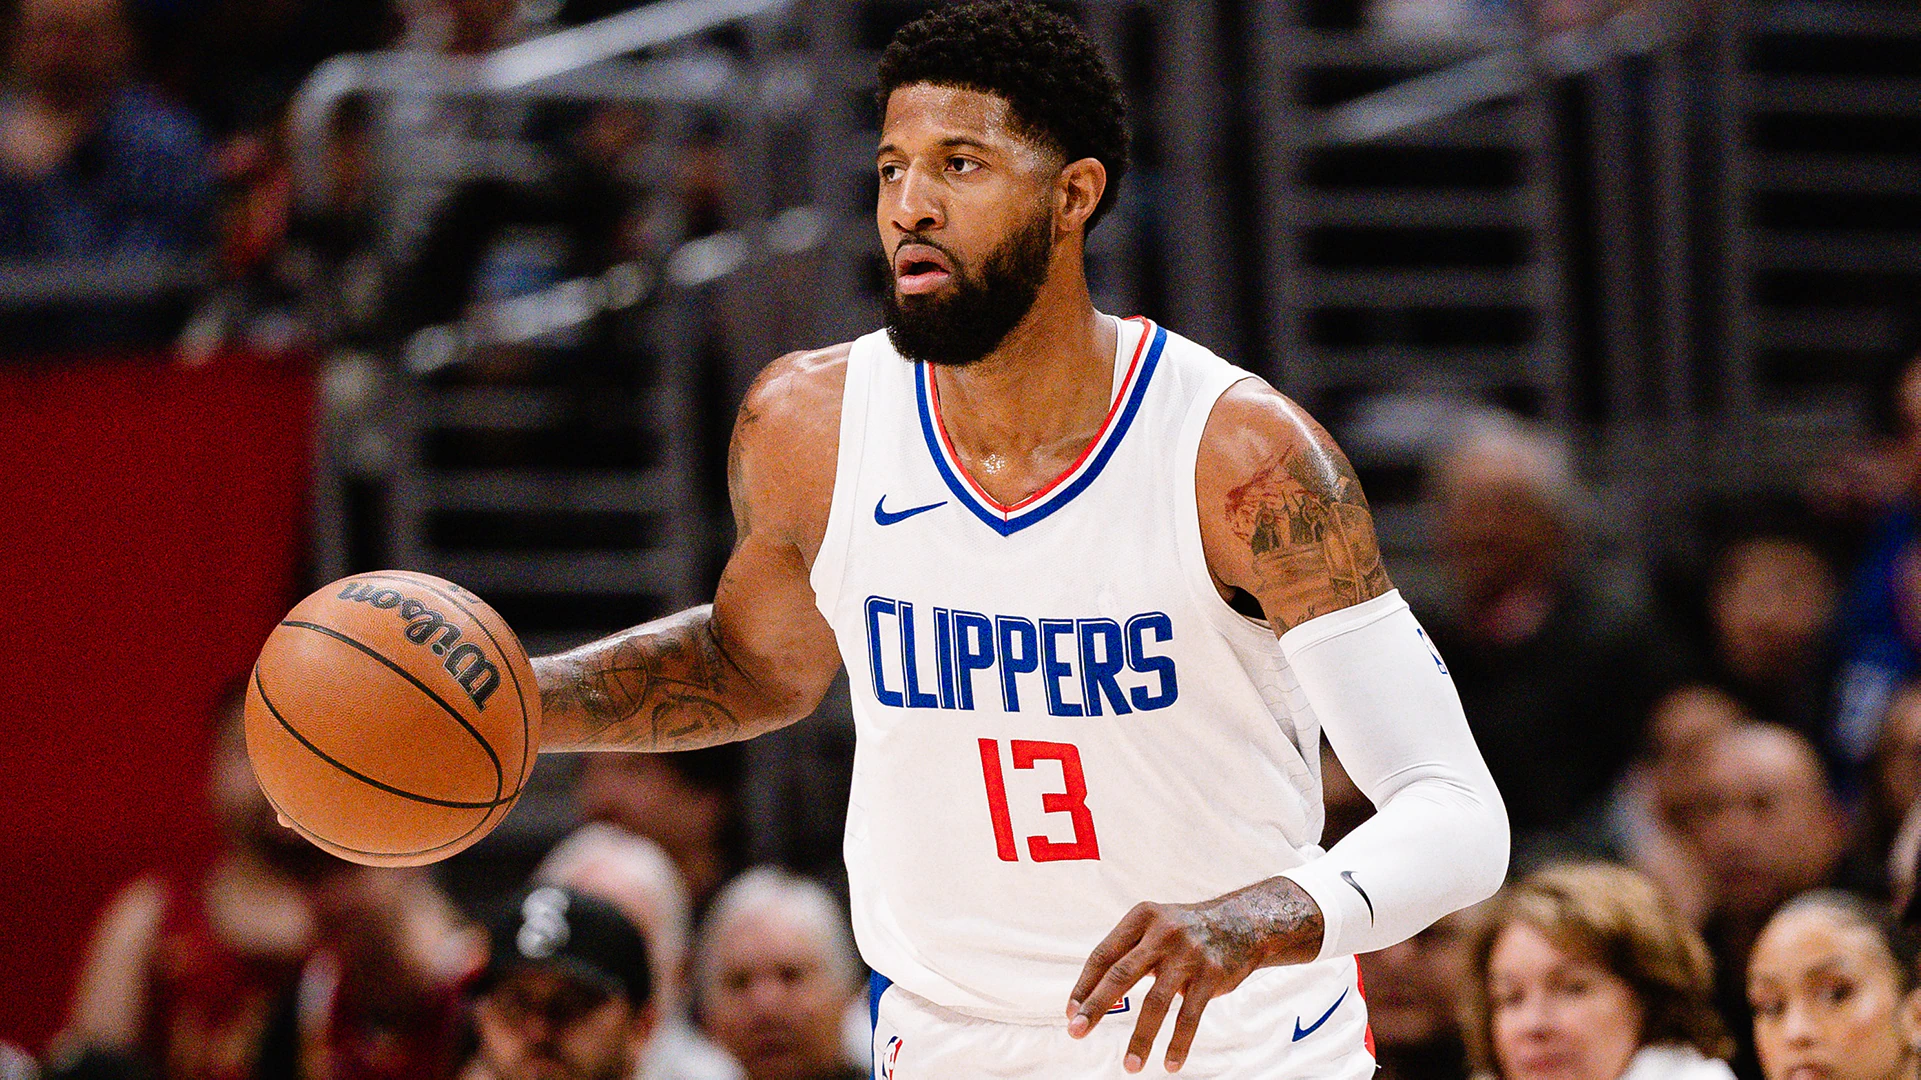 LA Clippers Legend Lou Williams Shares Insight on Paul George's Future with the Team